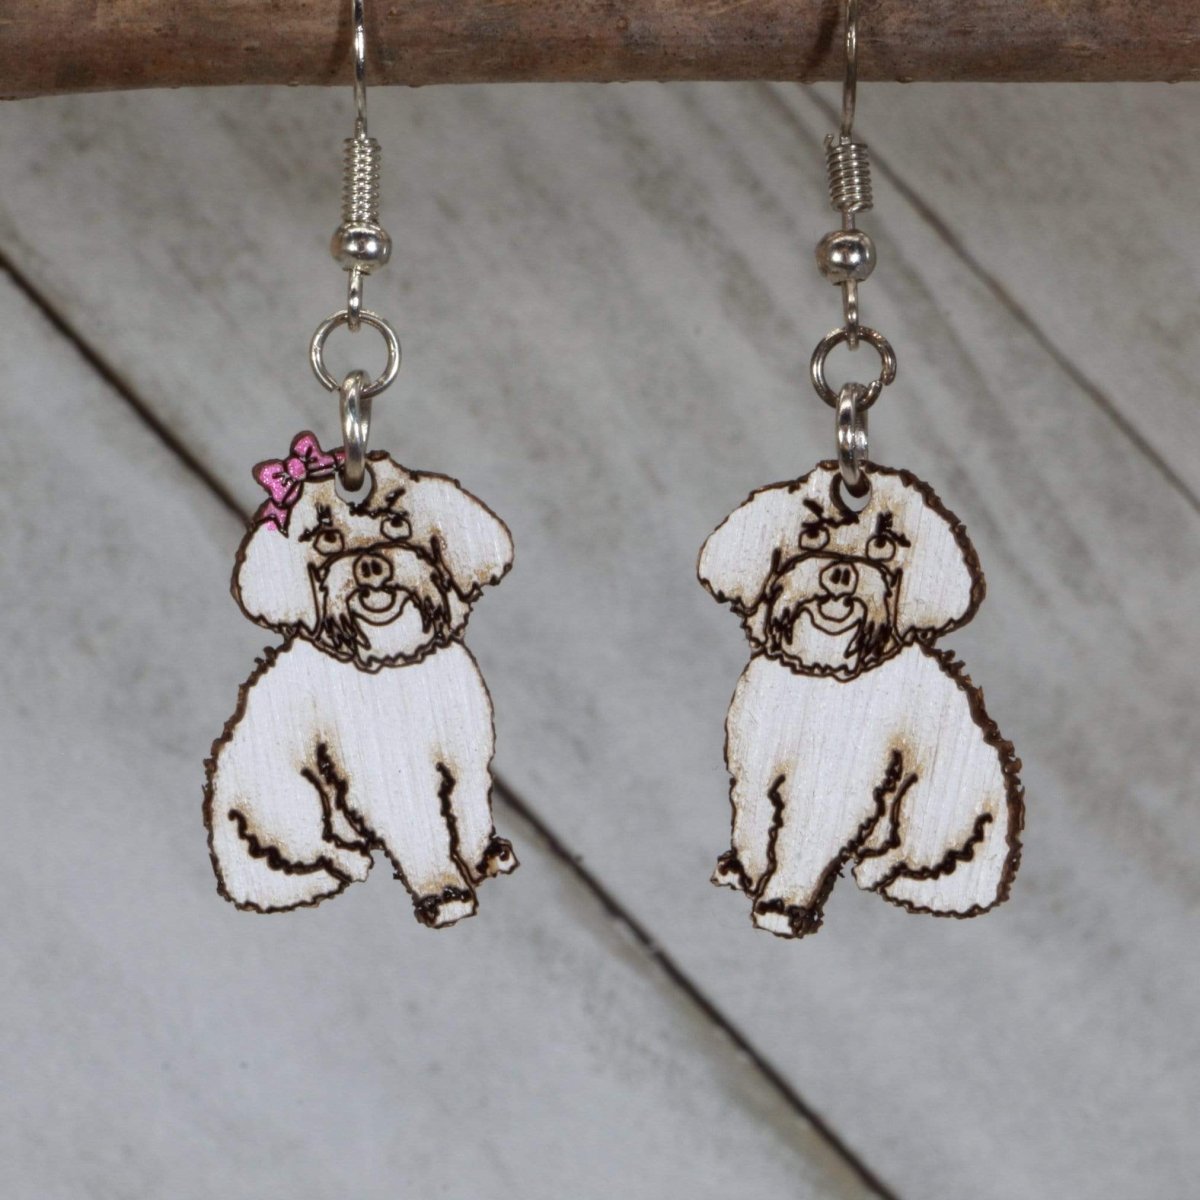 Maltipoo Wooden Dangle Earrings - One Bow and One Without - Cate's Concepts, LLC